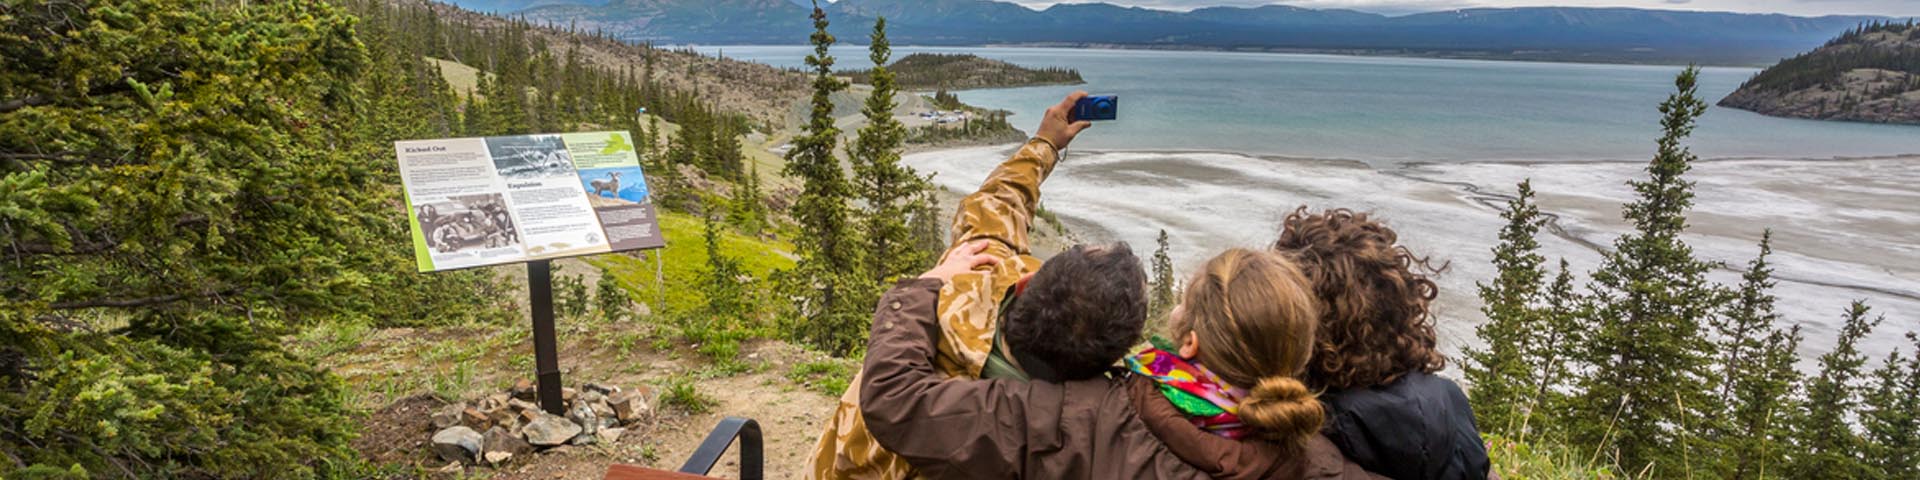 Three visitors on a bench snap a selfie in front of Kluane Lake on the Soldier's Summit Trail in Kluane National Park and Reserve.